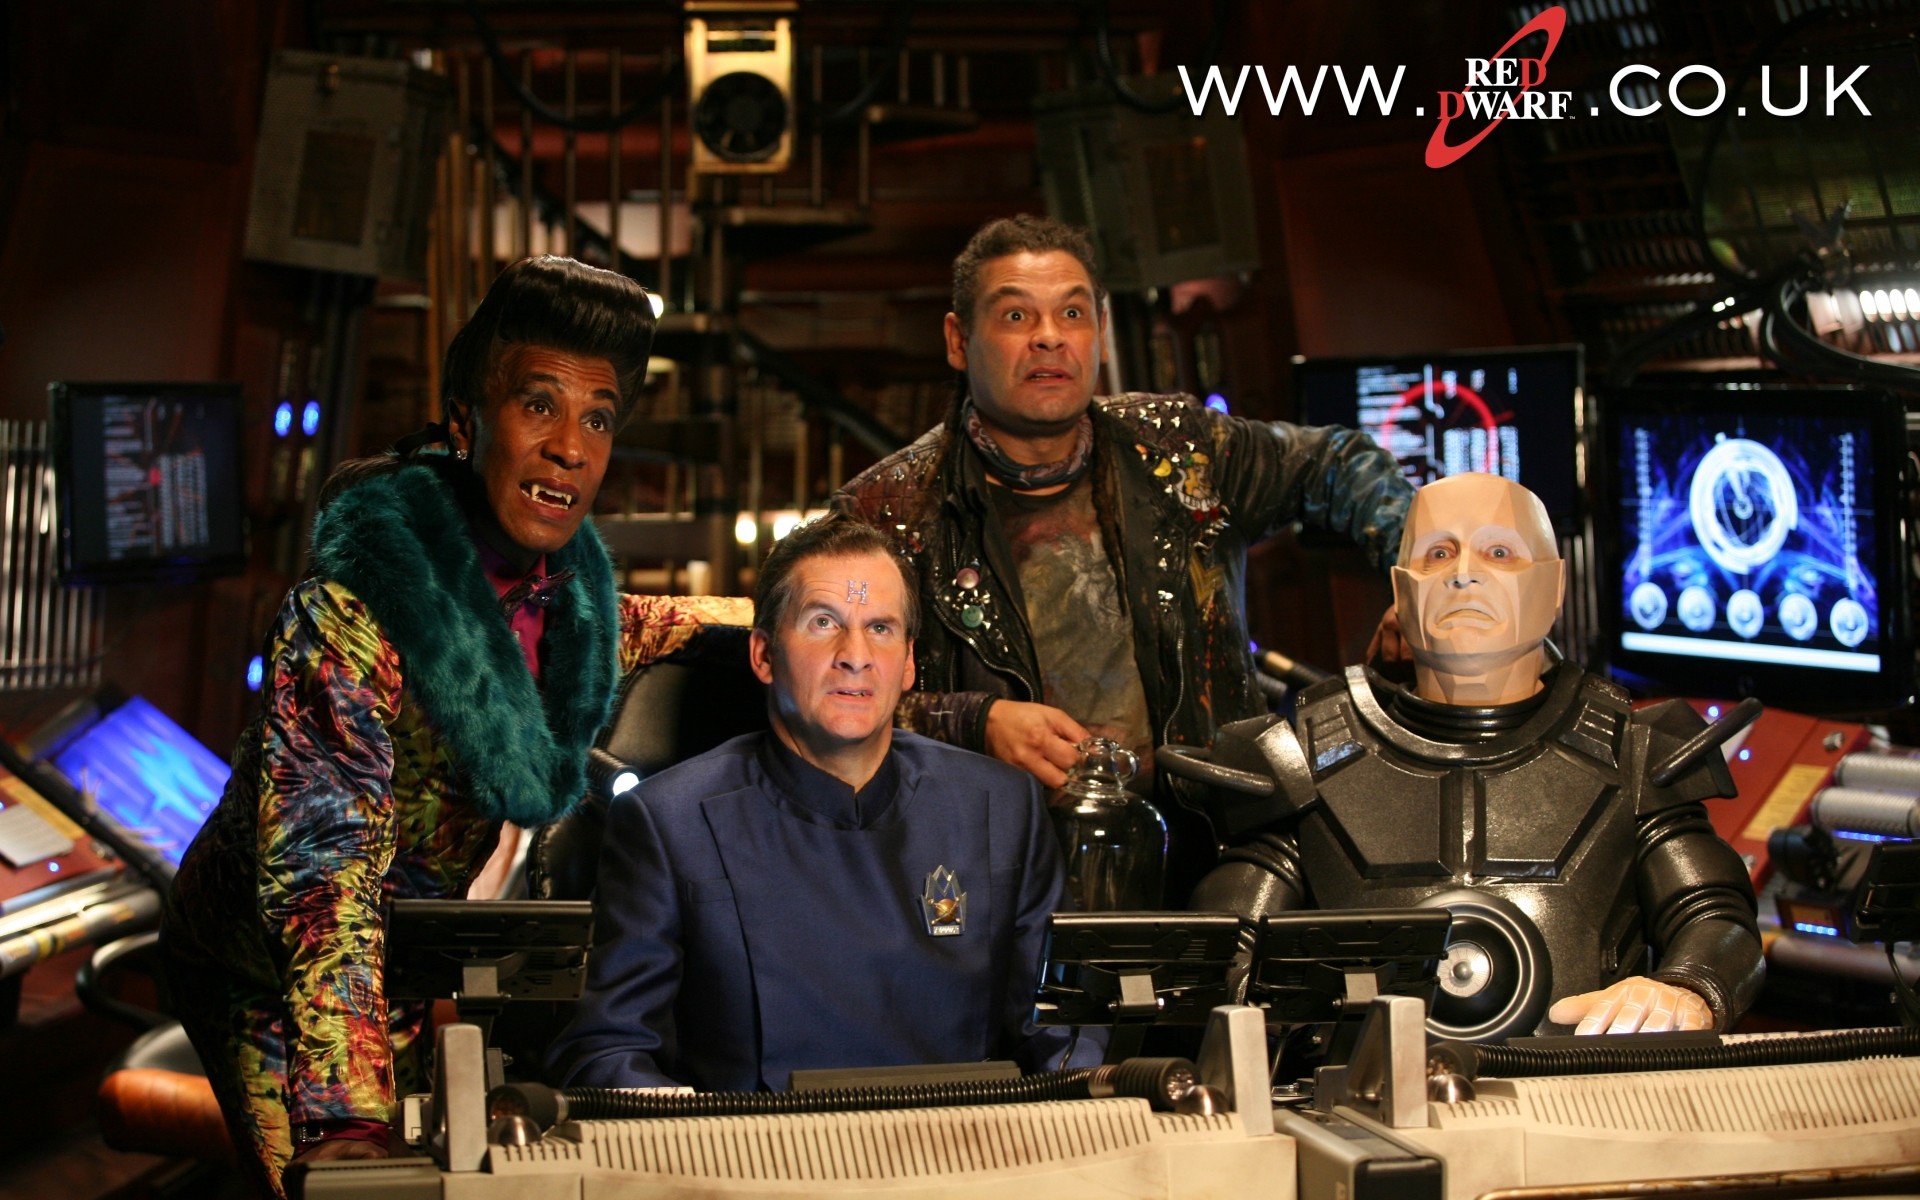 1920x1200 Downloads | Red Dwarf - The Official Website